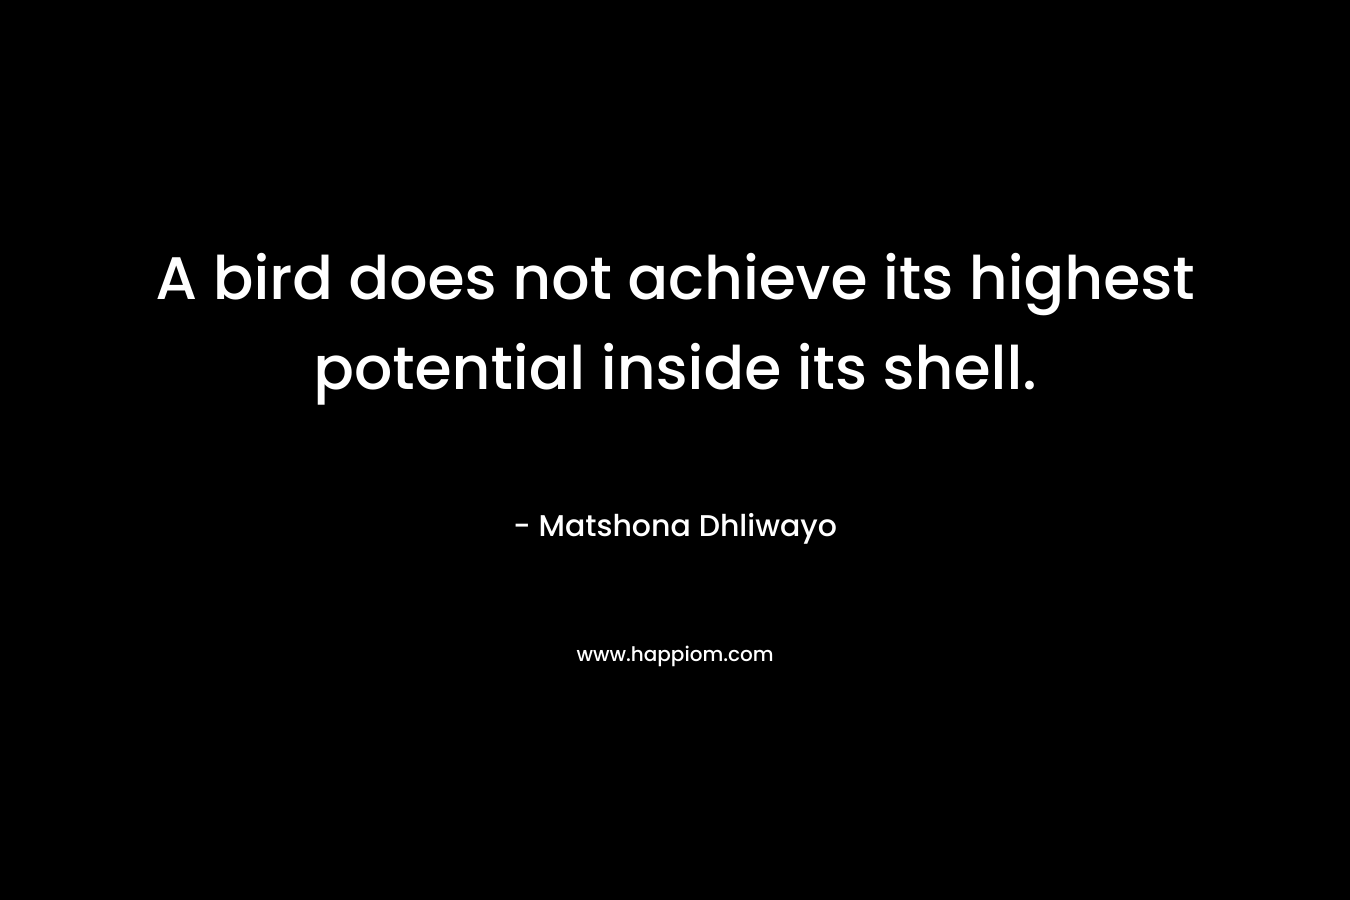 A bird does not achieve its highest potential inside its shell.